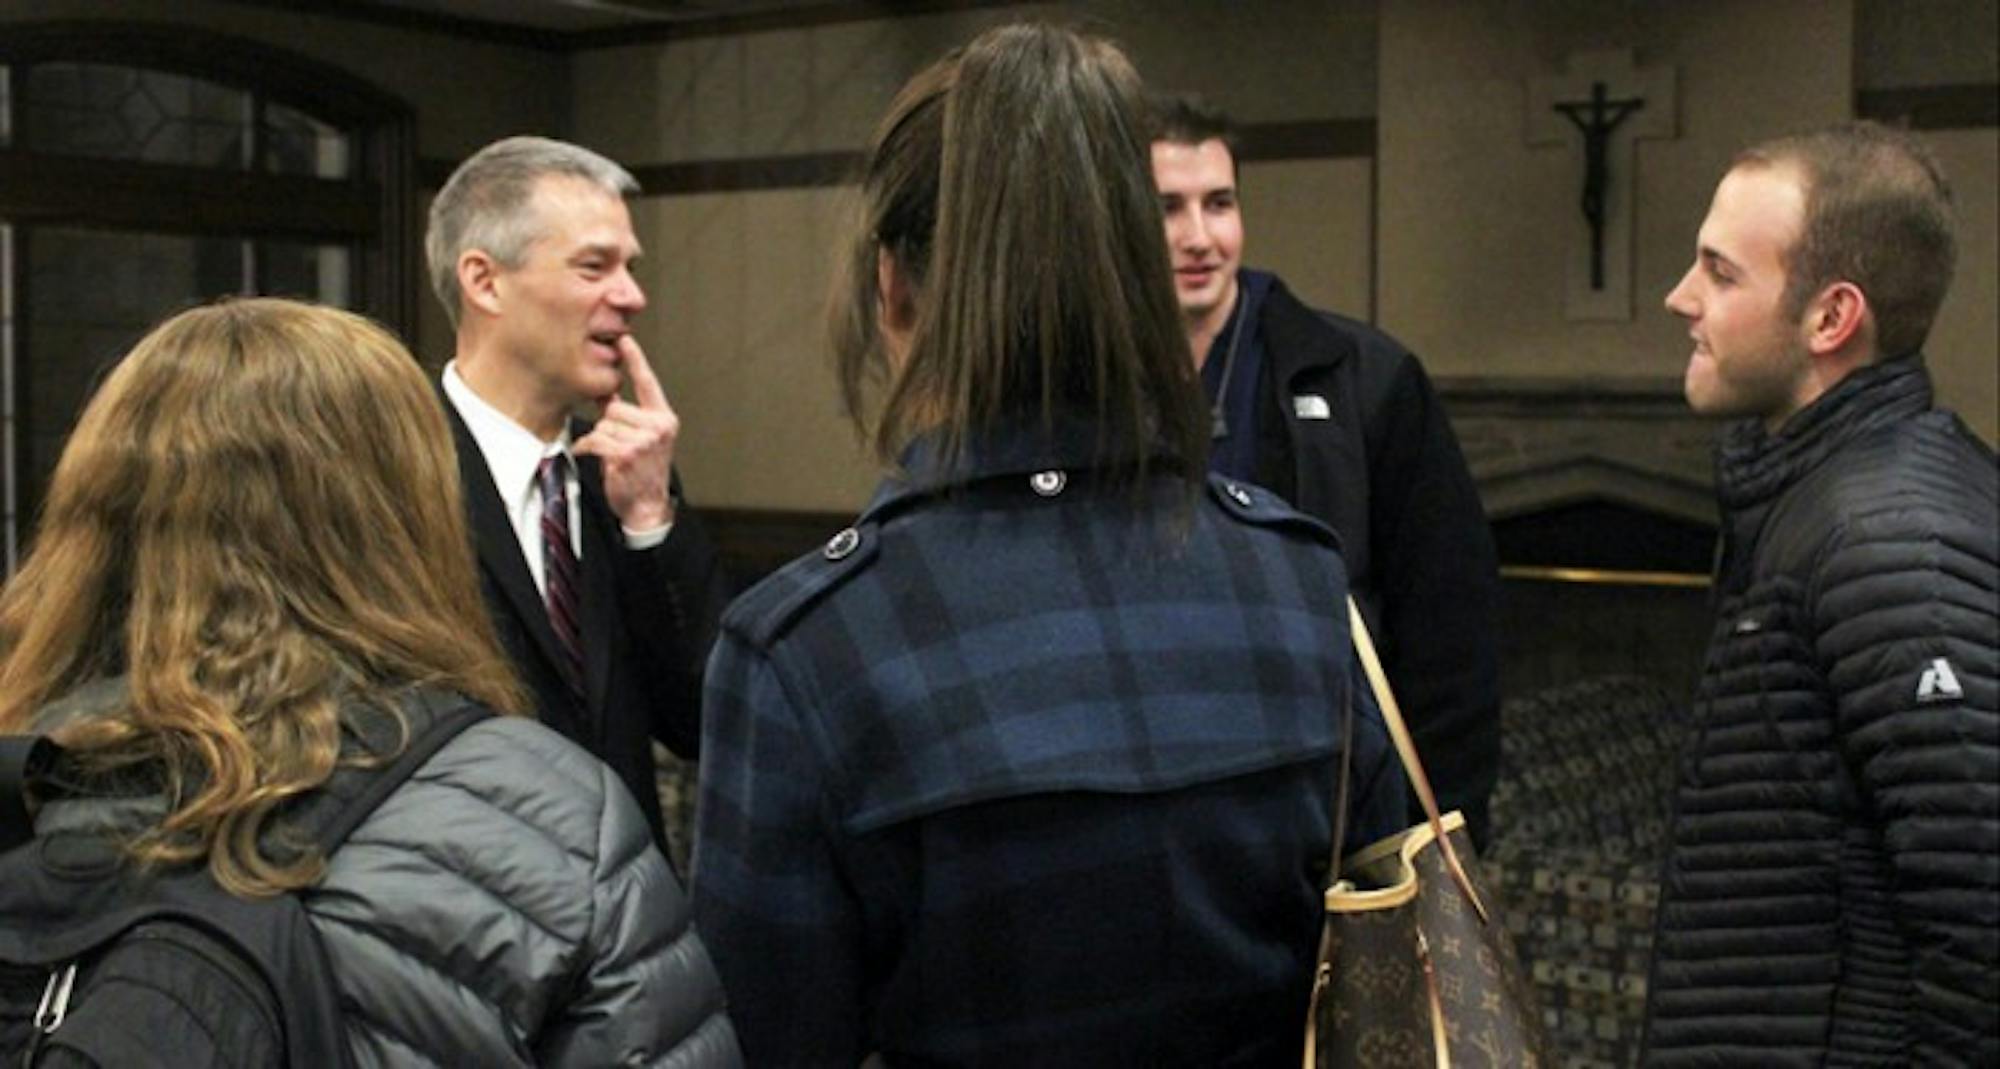 Professor of finance Carl Ackermann talks with students following his speech on Tuesday evening in the Last Lecture series.